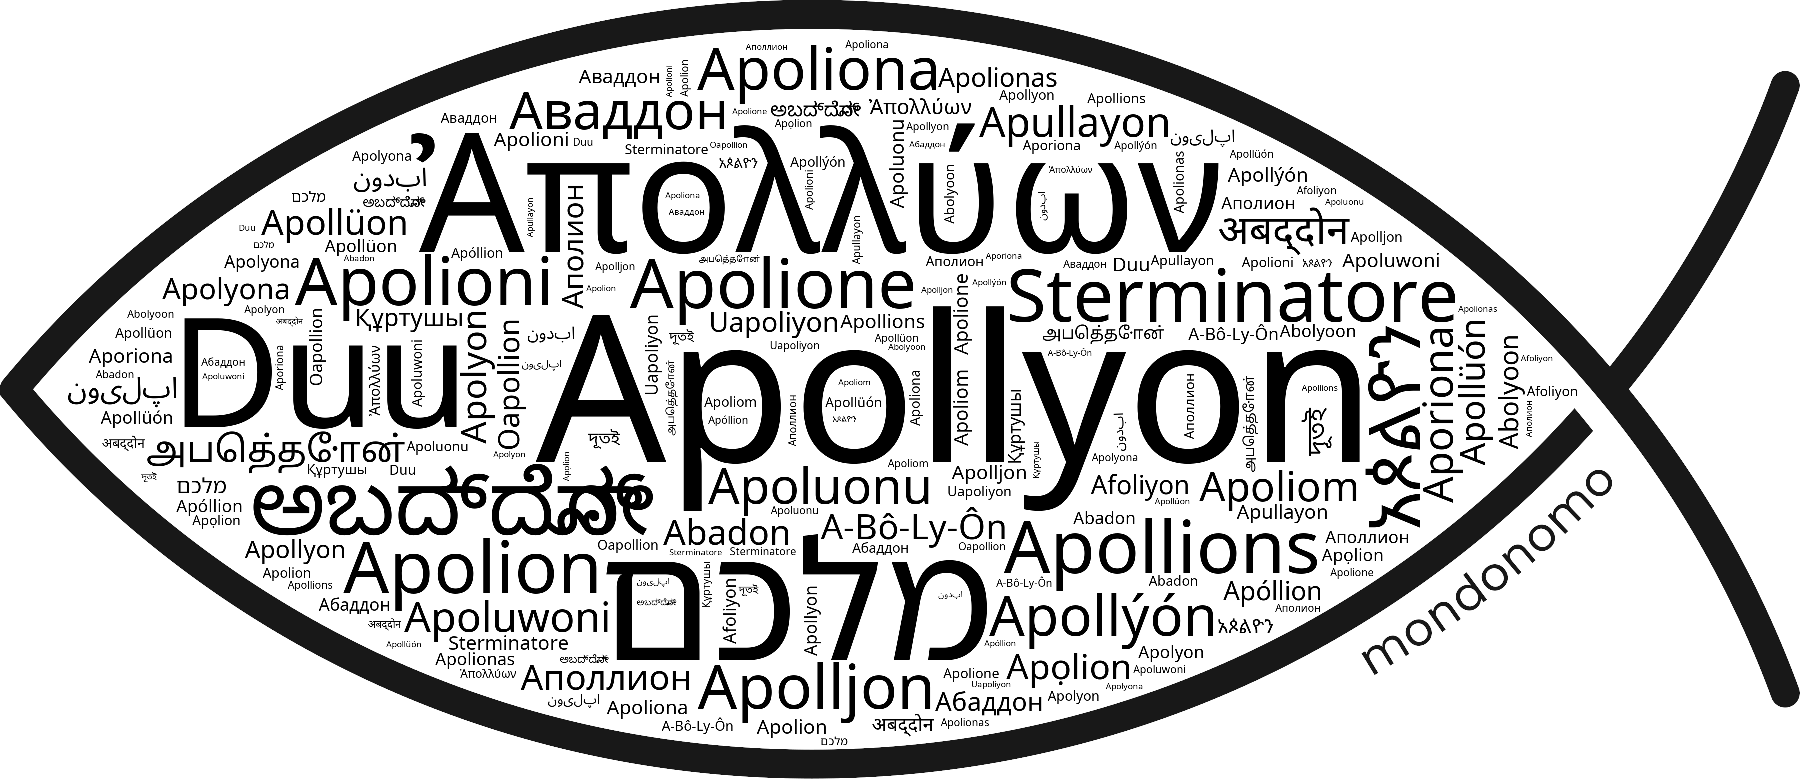 Name Apollyon in the world's Bibles